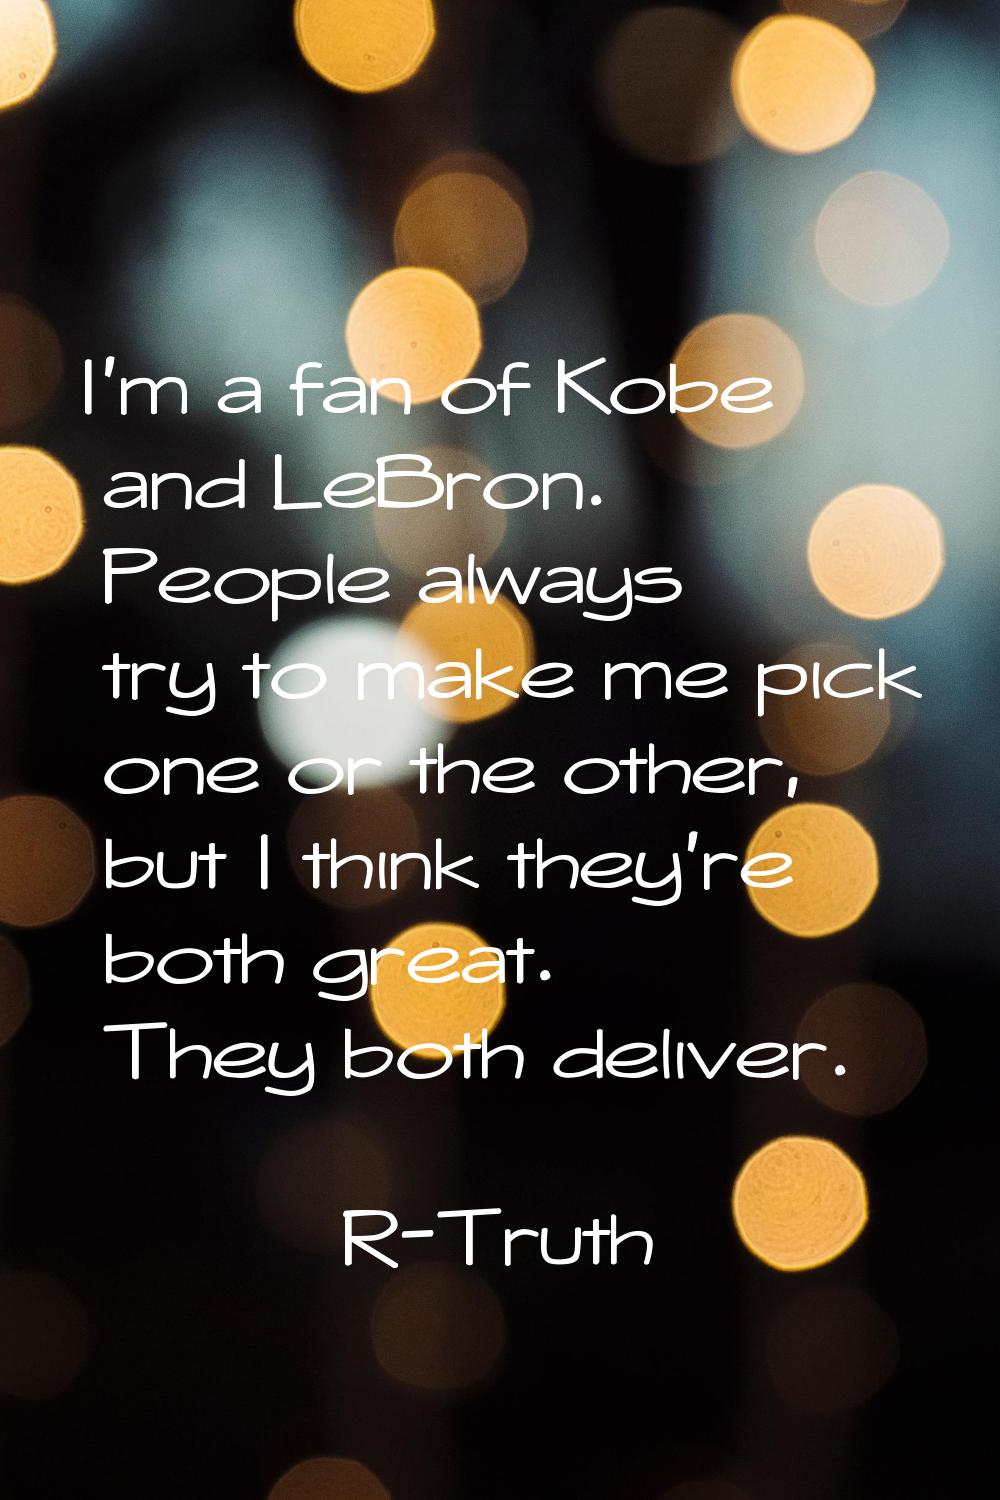 I'm a fan of Kobe and LeBron. People always try to make me pick one or the other, but I think they'